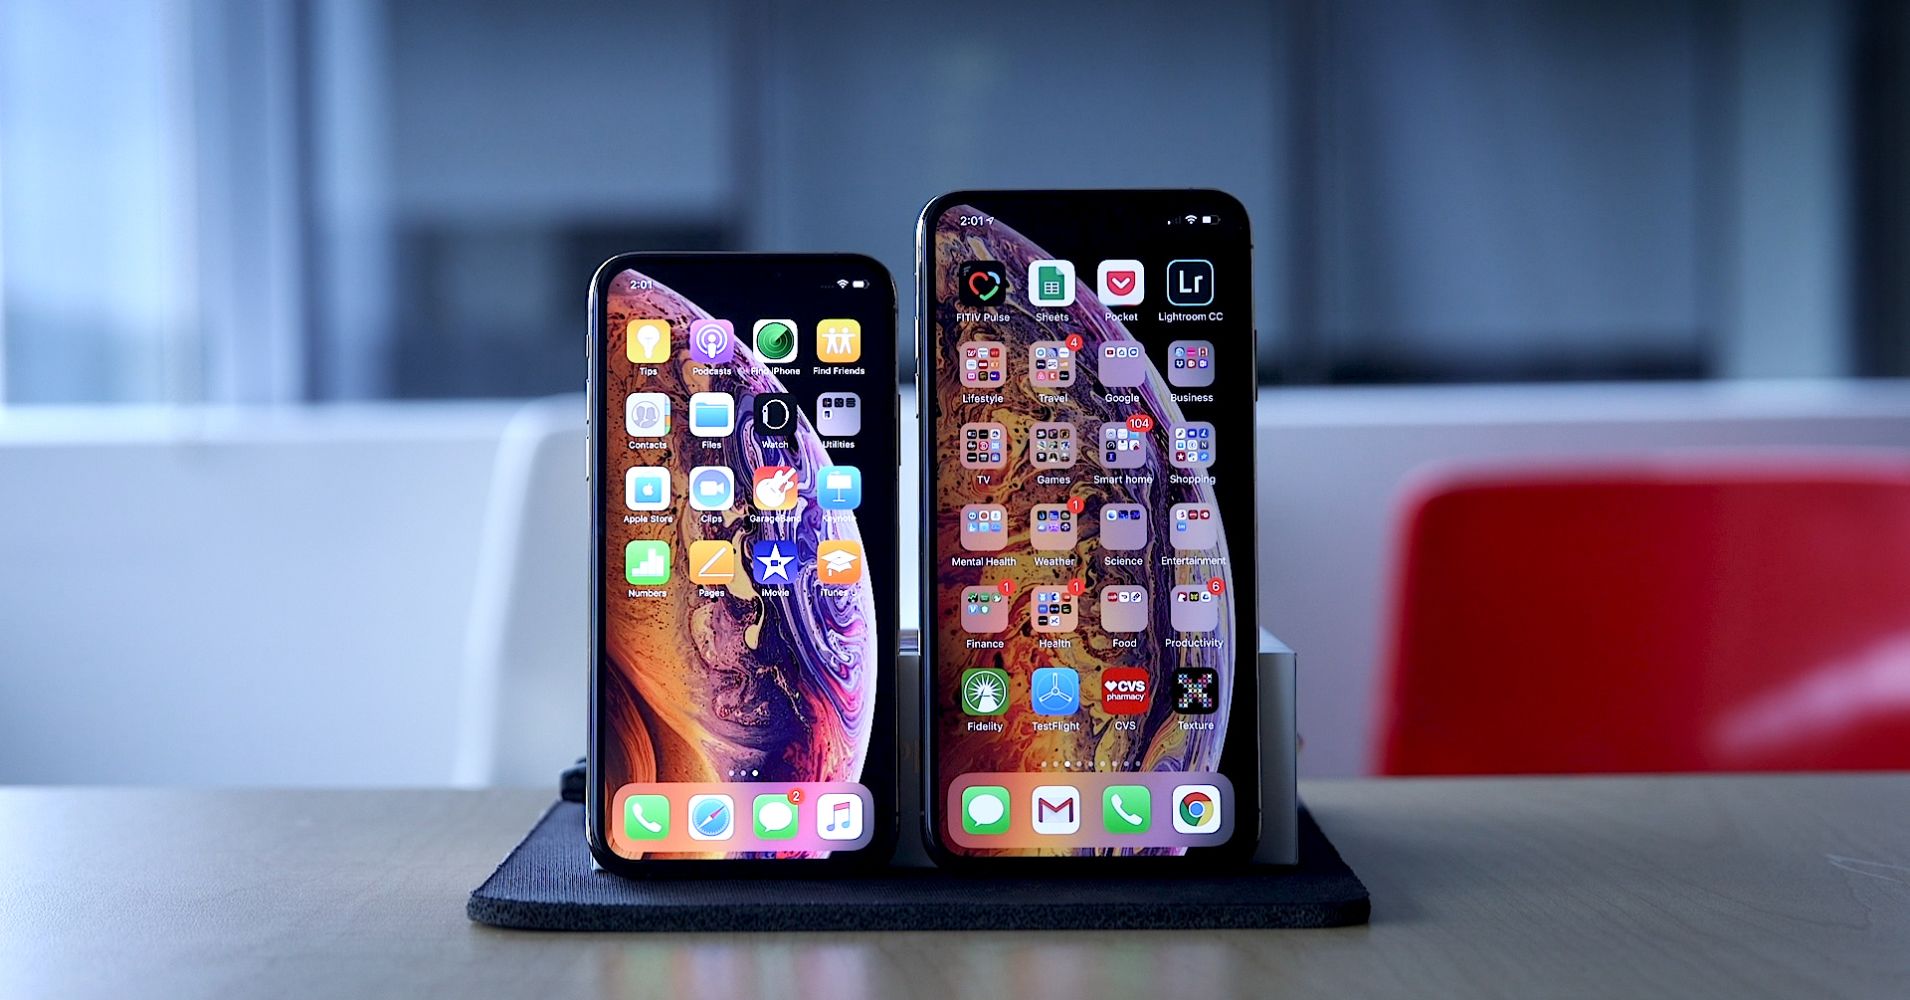 Price of the iPhone XS and XS Max